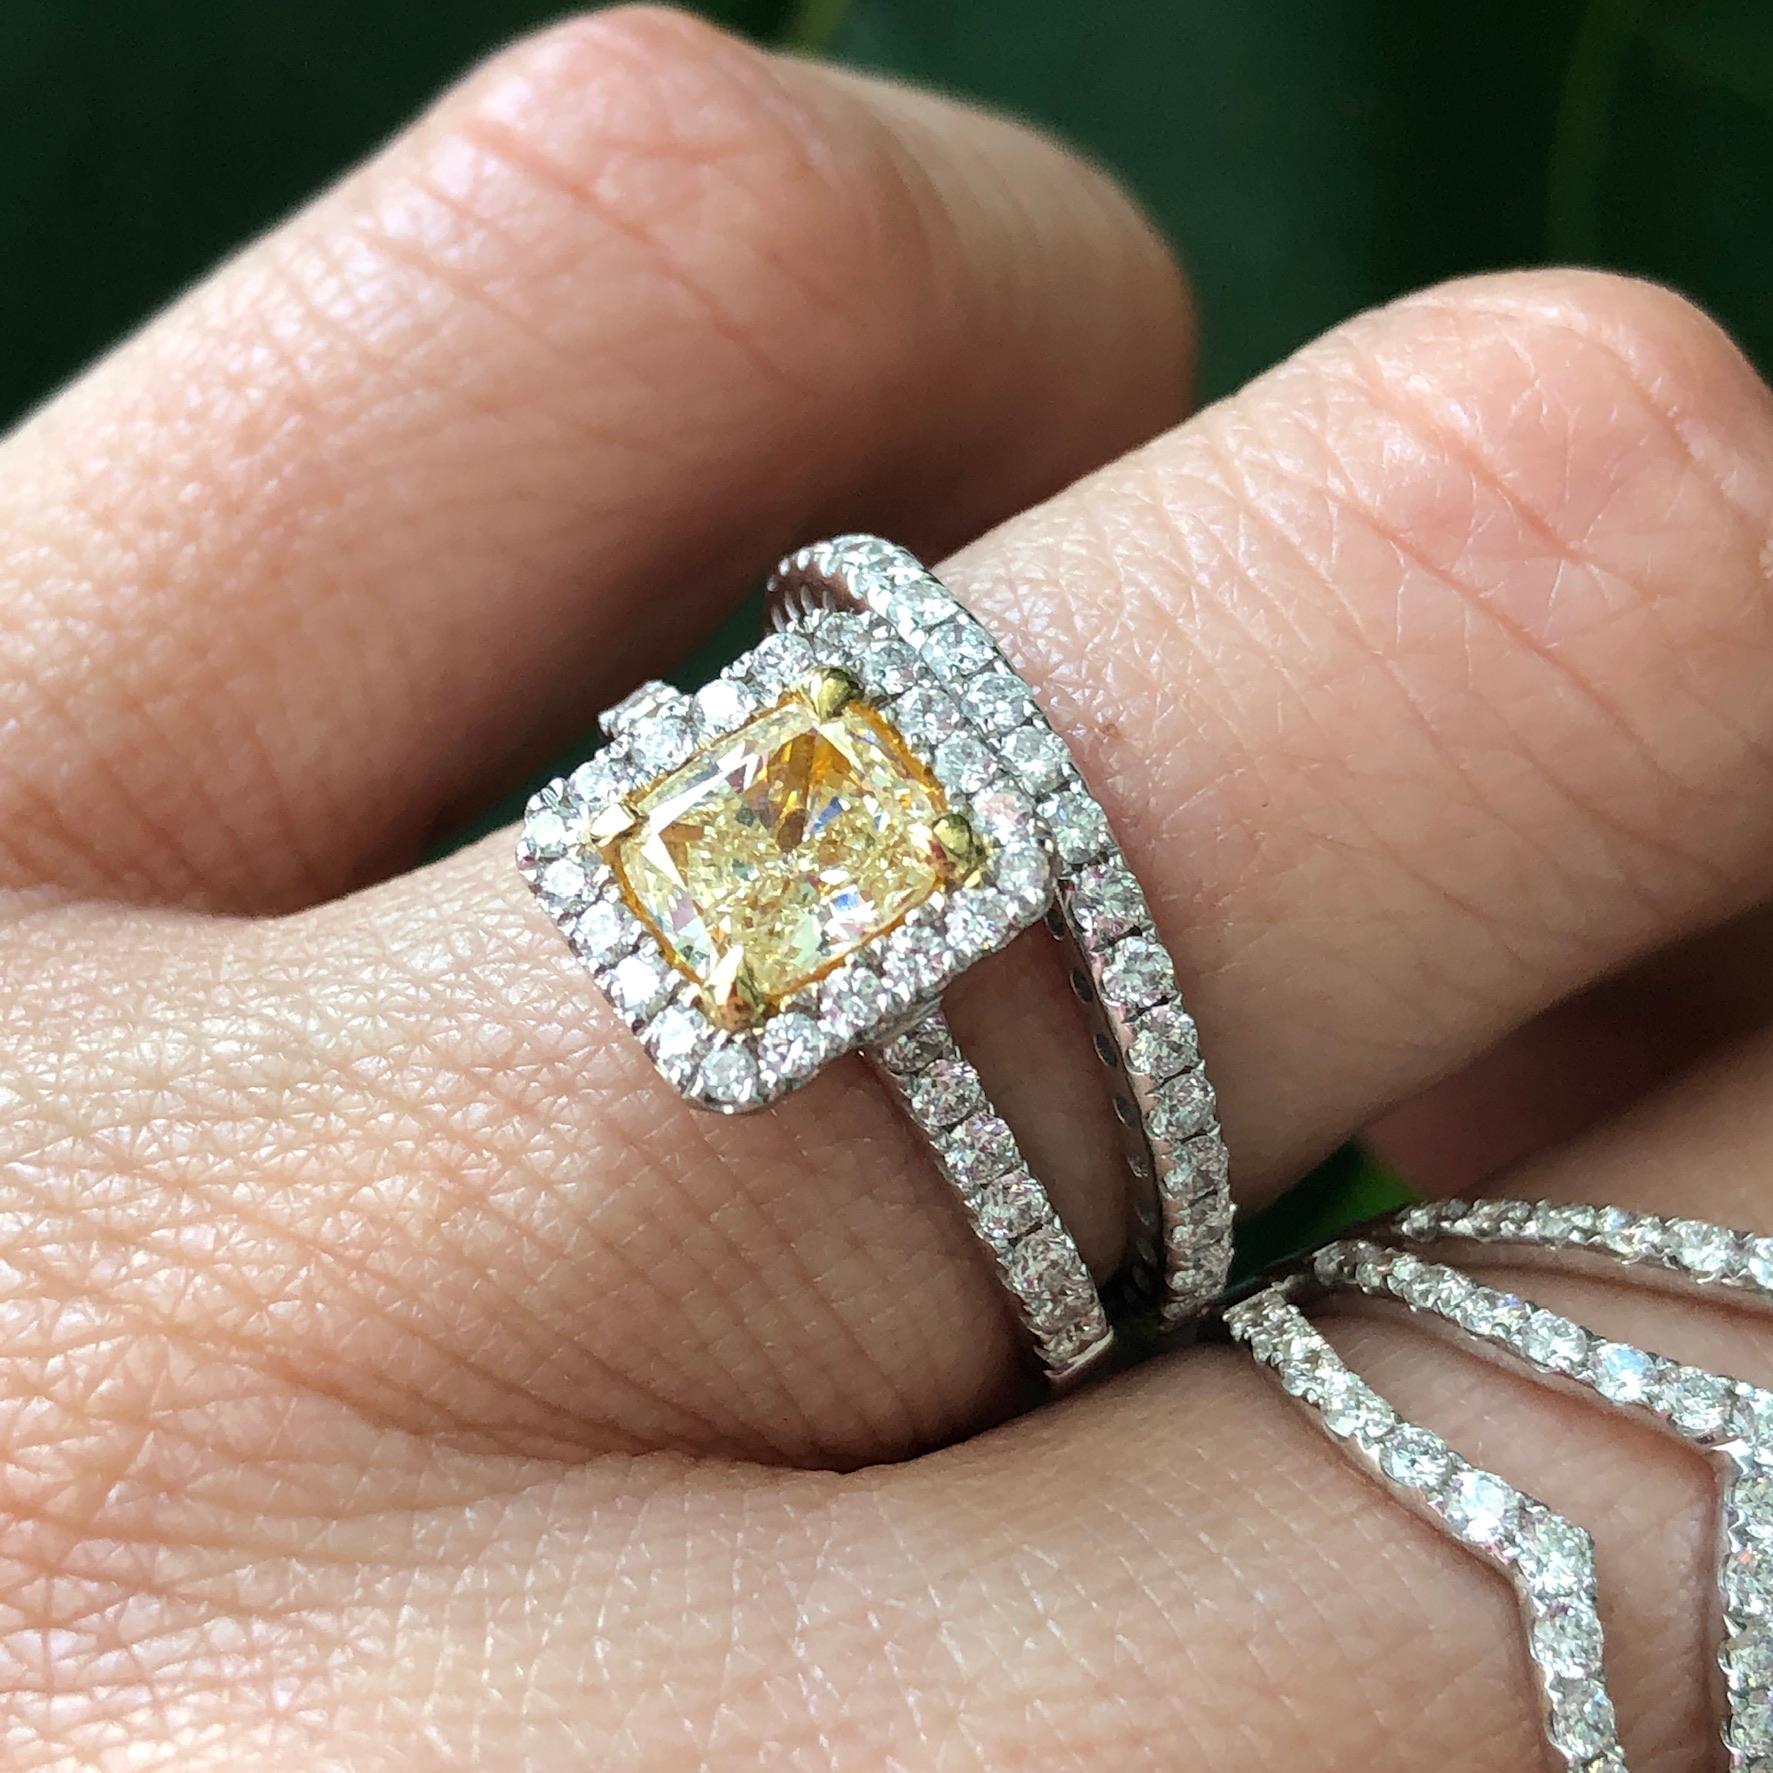 18K white gold, fancy intense yellow diamond engagement ring with diamond halo.

Features
18k white gold
1.20 carat, cushion cut, fancy intense yellow diamond.
.48 carat total weight in white diamonds on the band and halo
Ring size 6.5. Can be